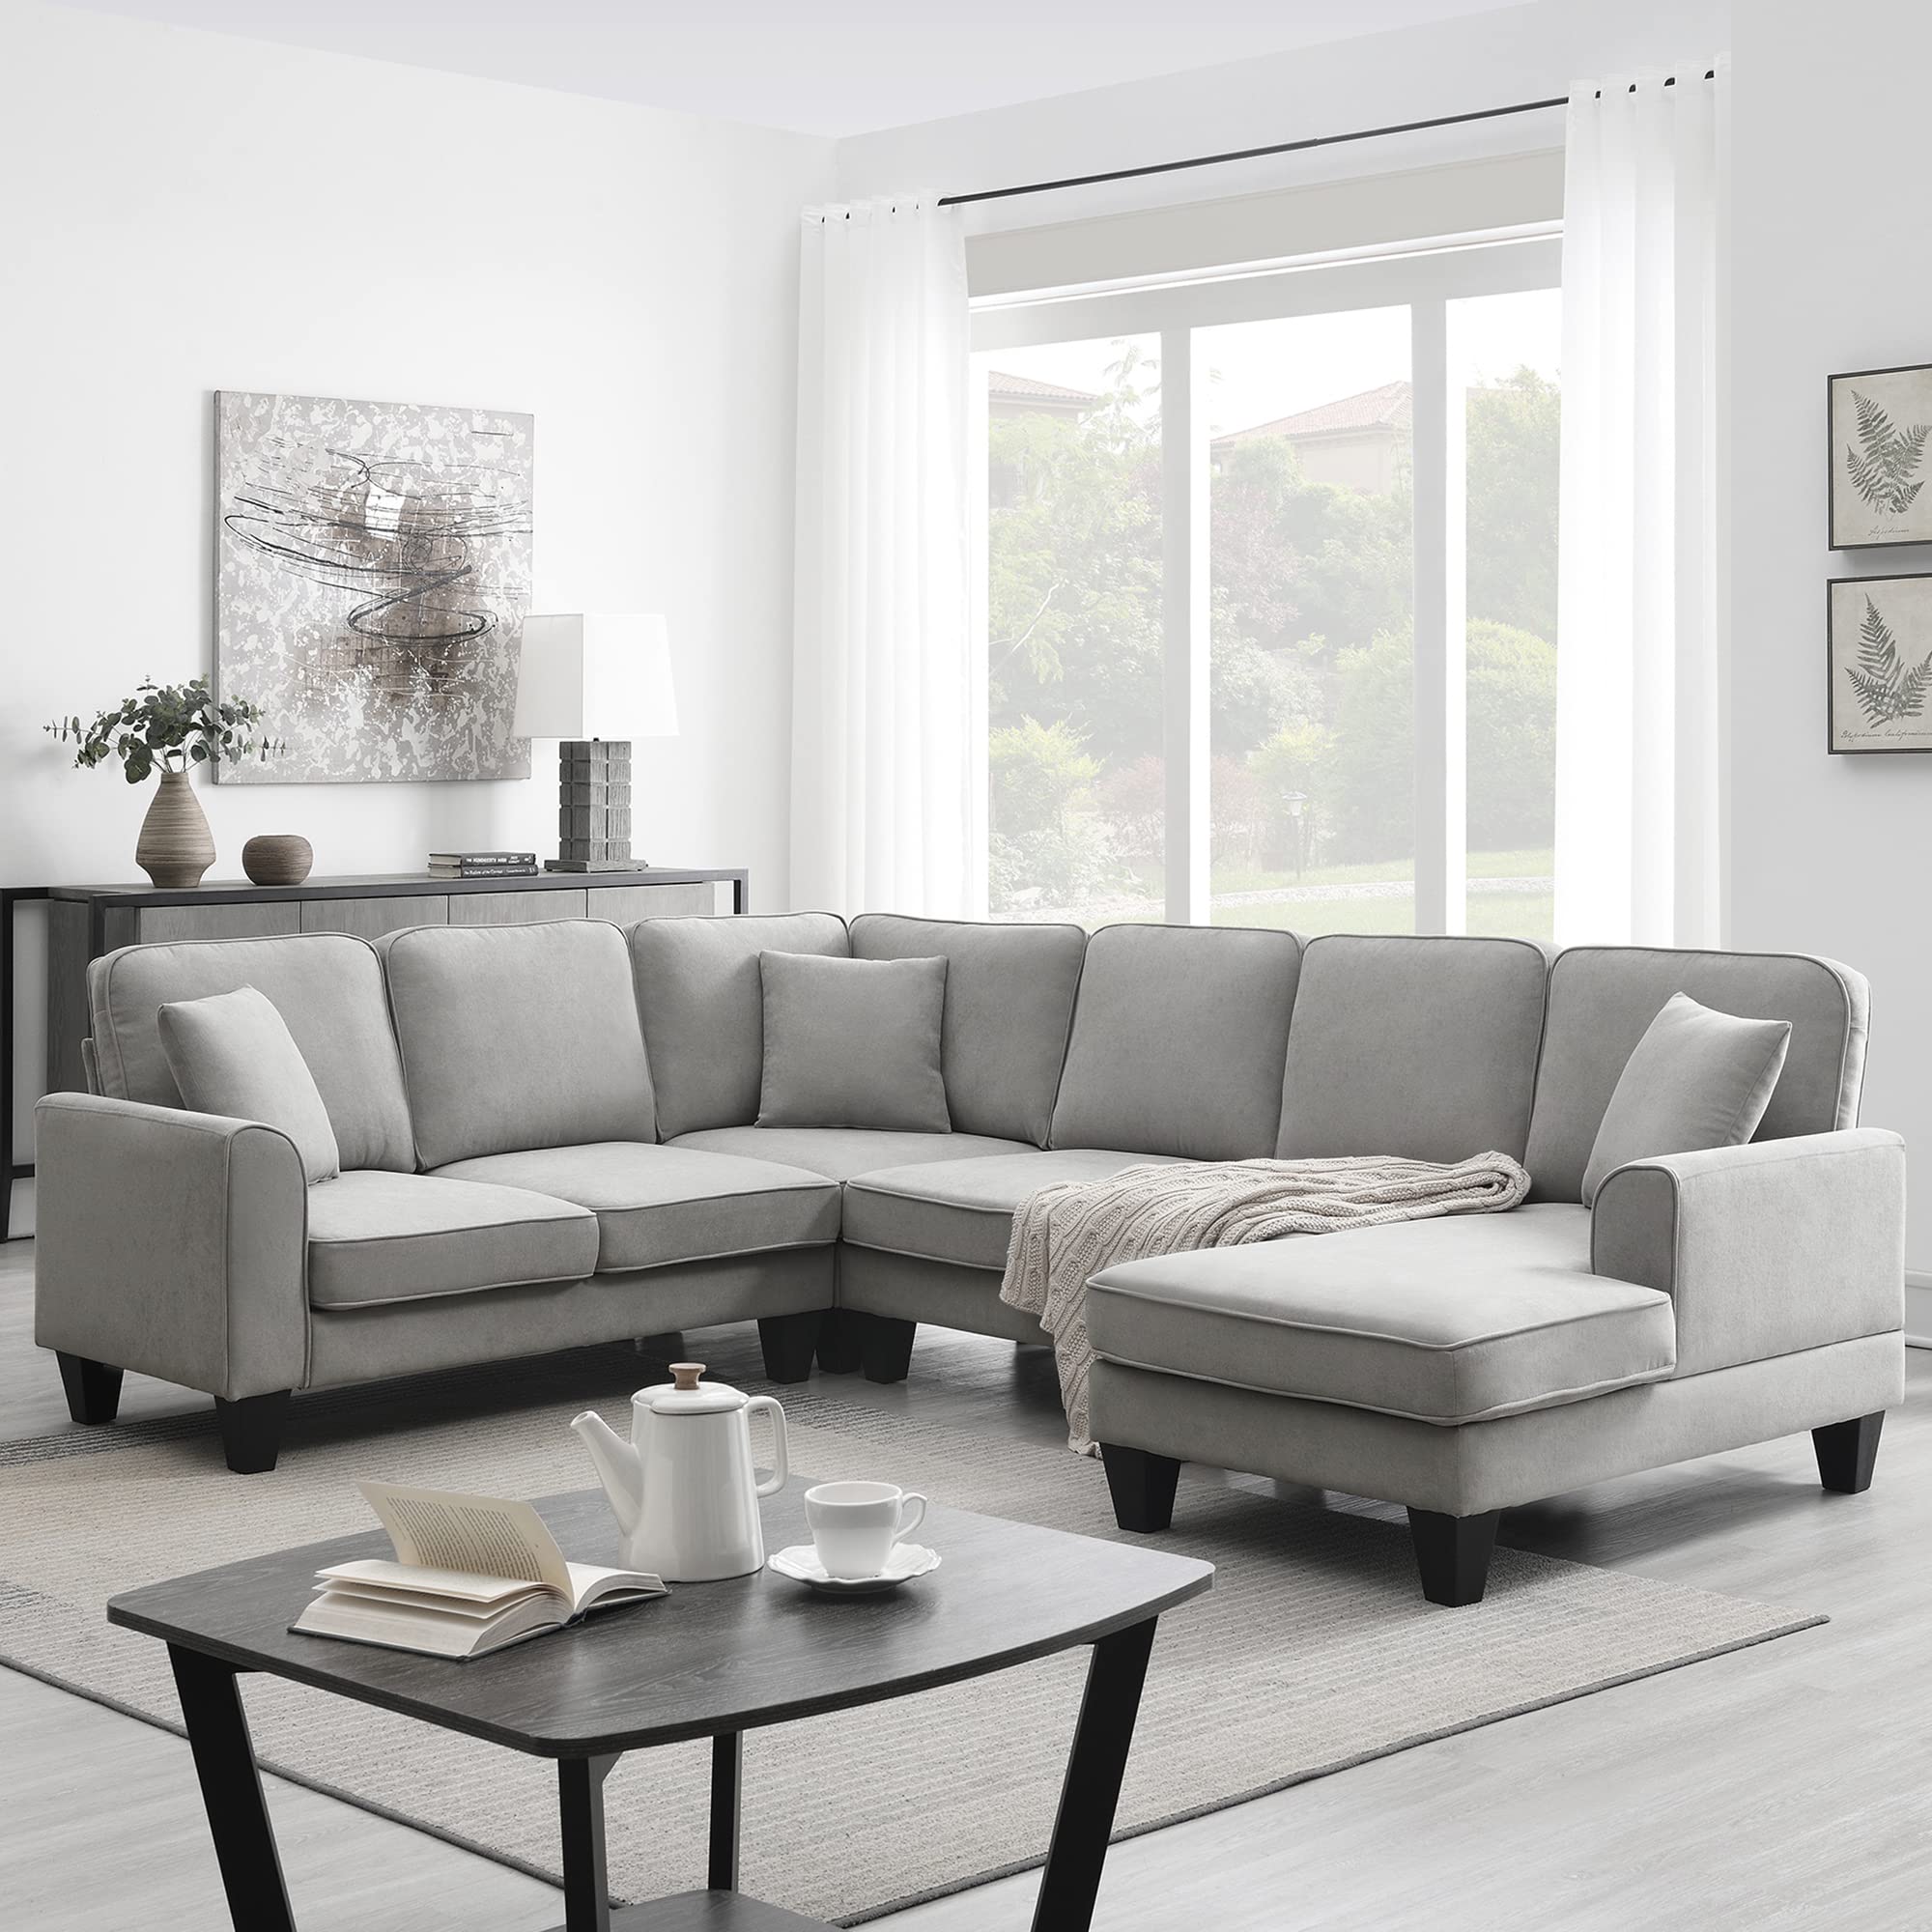 SOCOUCH 10885.5" Oversized Sectional Sofa Set, U-Shaped Modern Sleeper 7 Seat Modular Couch with Reversible Chaise and 3 Pillows for Living Room Office, Light Gray $981